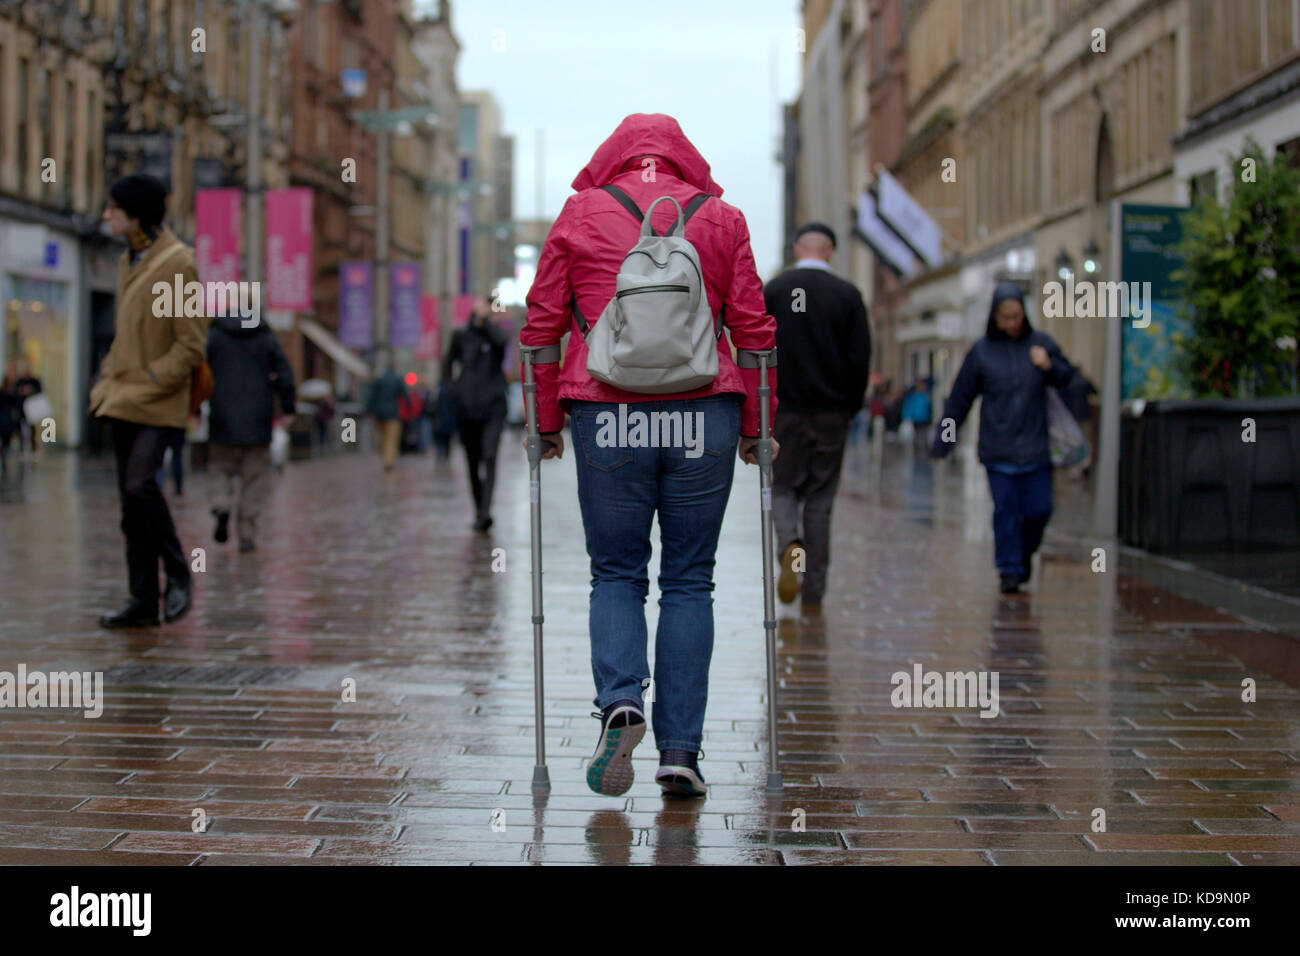 girl with walking sticks on Buchanan street Glasgow in perspective from behind crutches walking aids Stock Photo